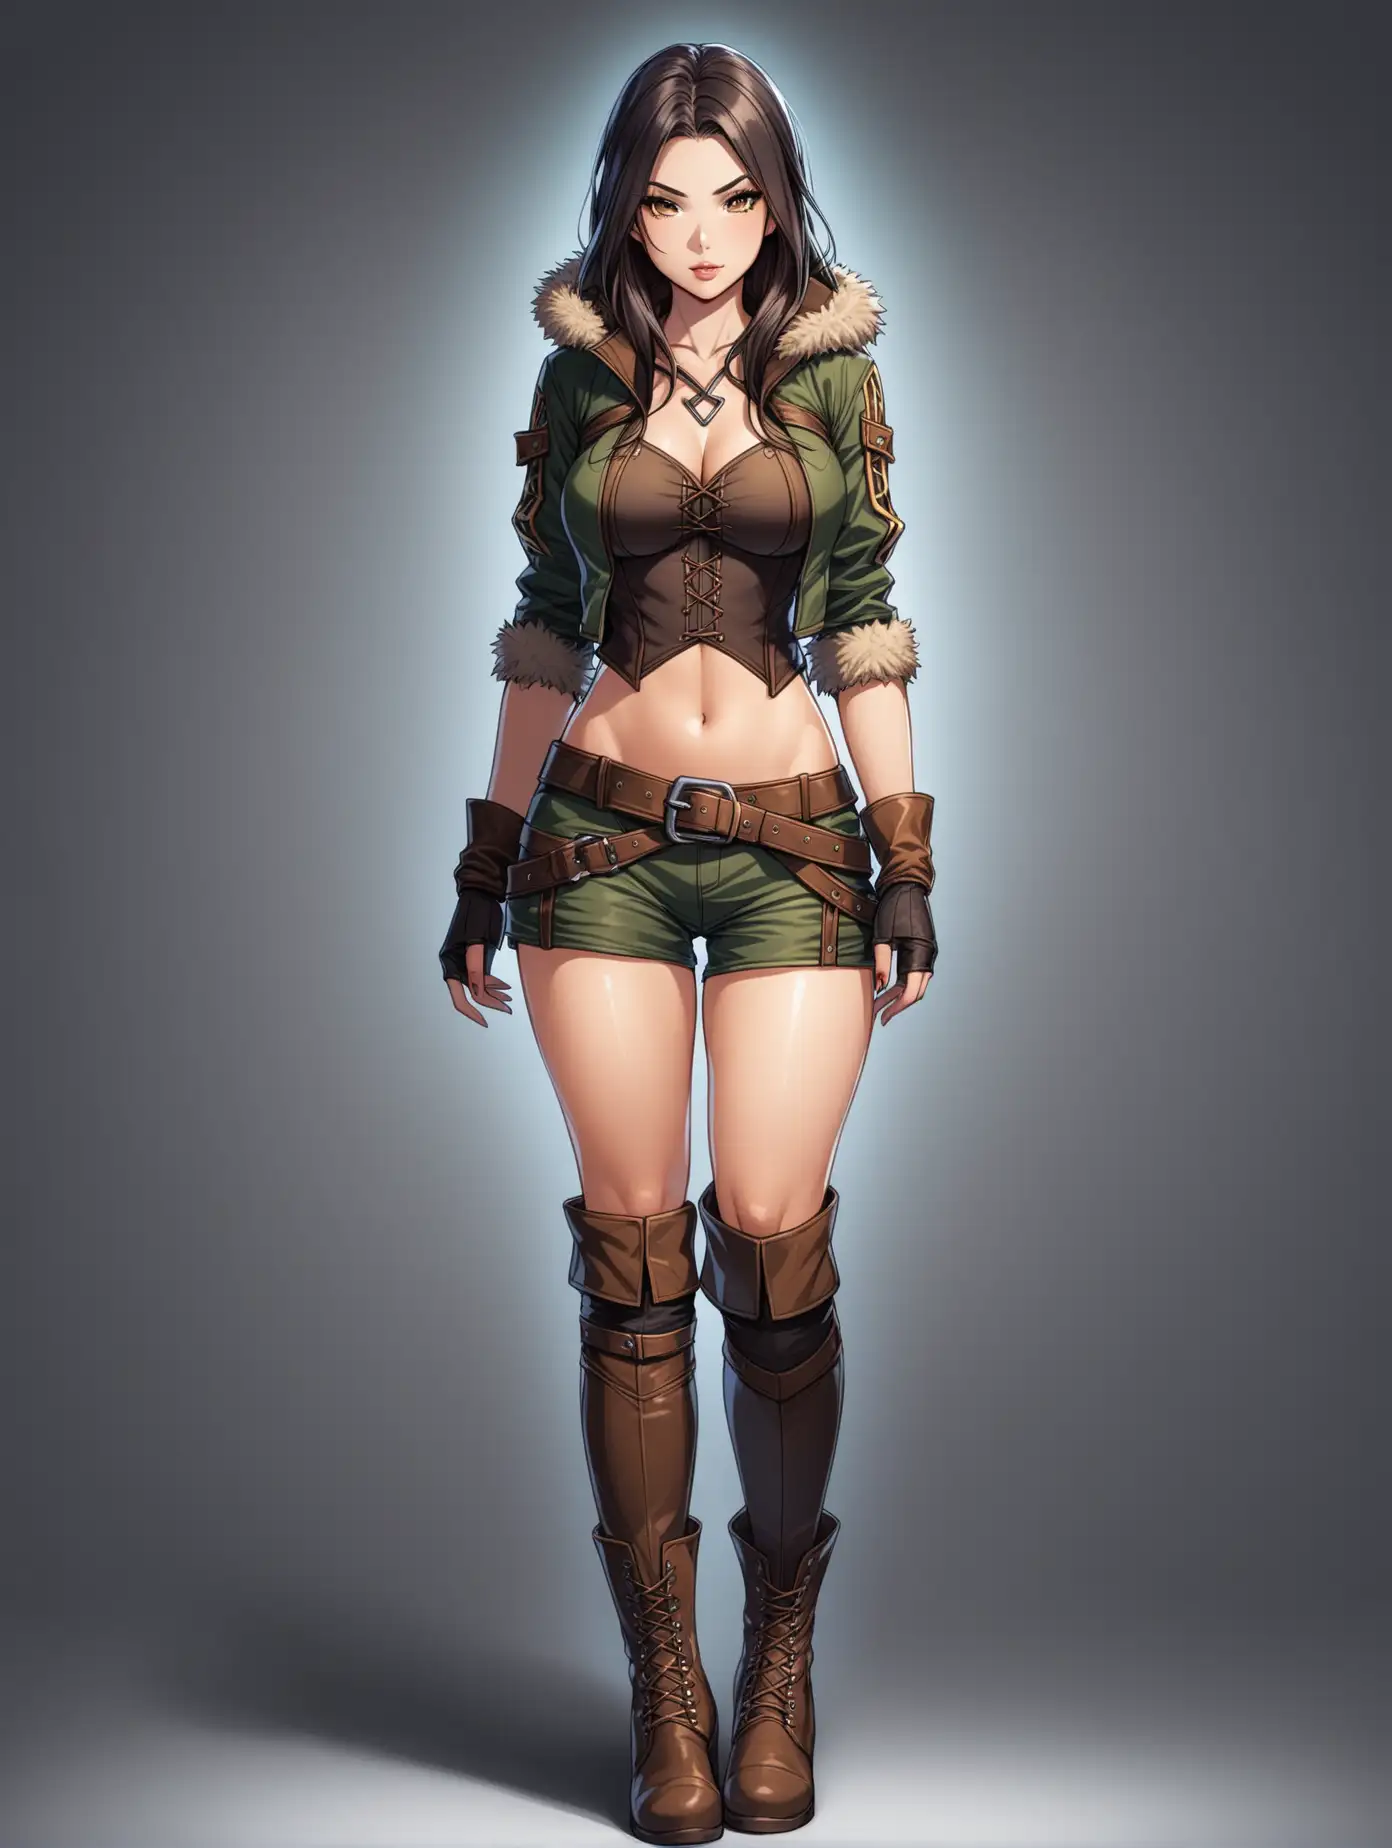 Ankle-High-Boots-Hot-Huntress-in-Full-Body-Portrait